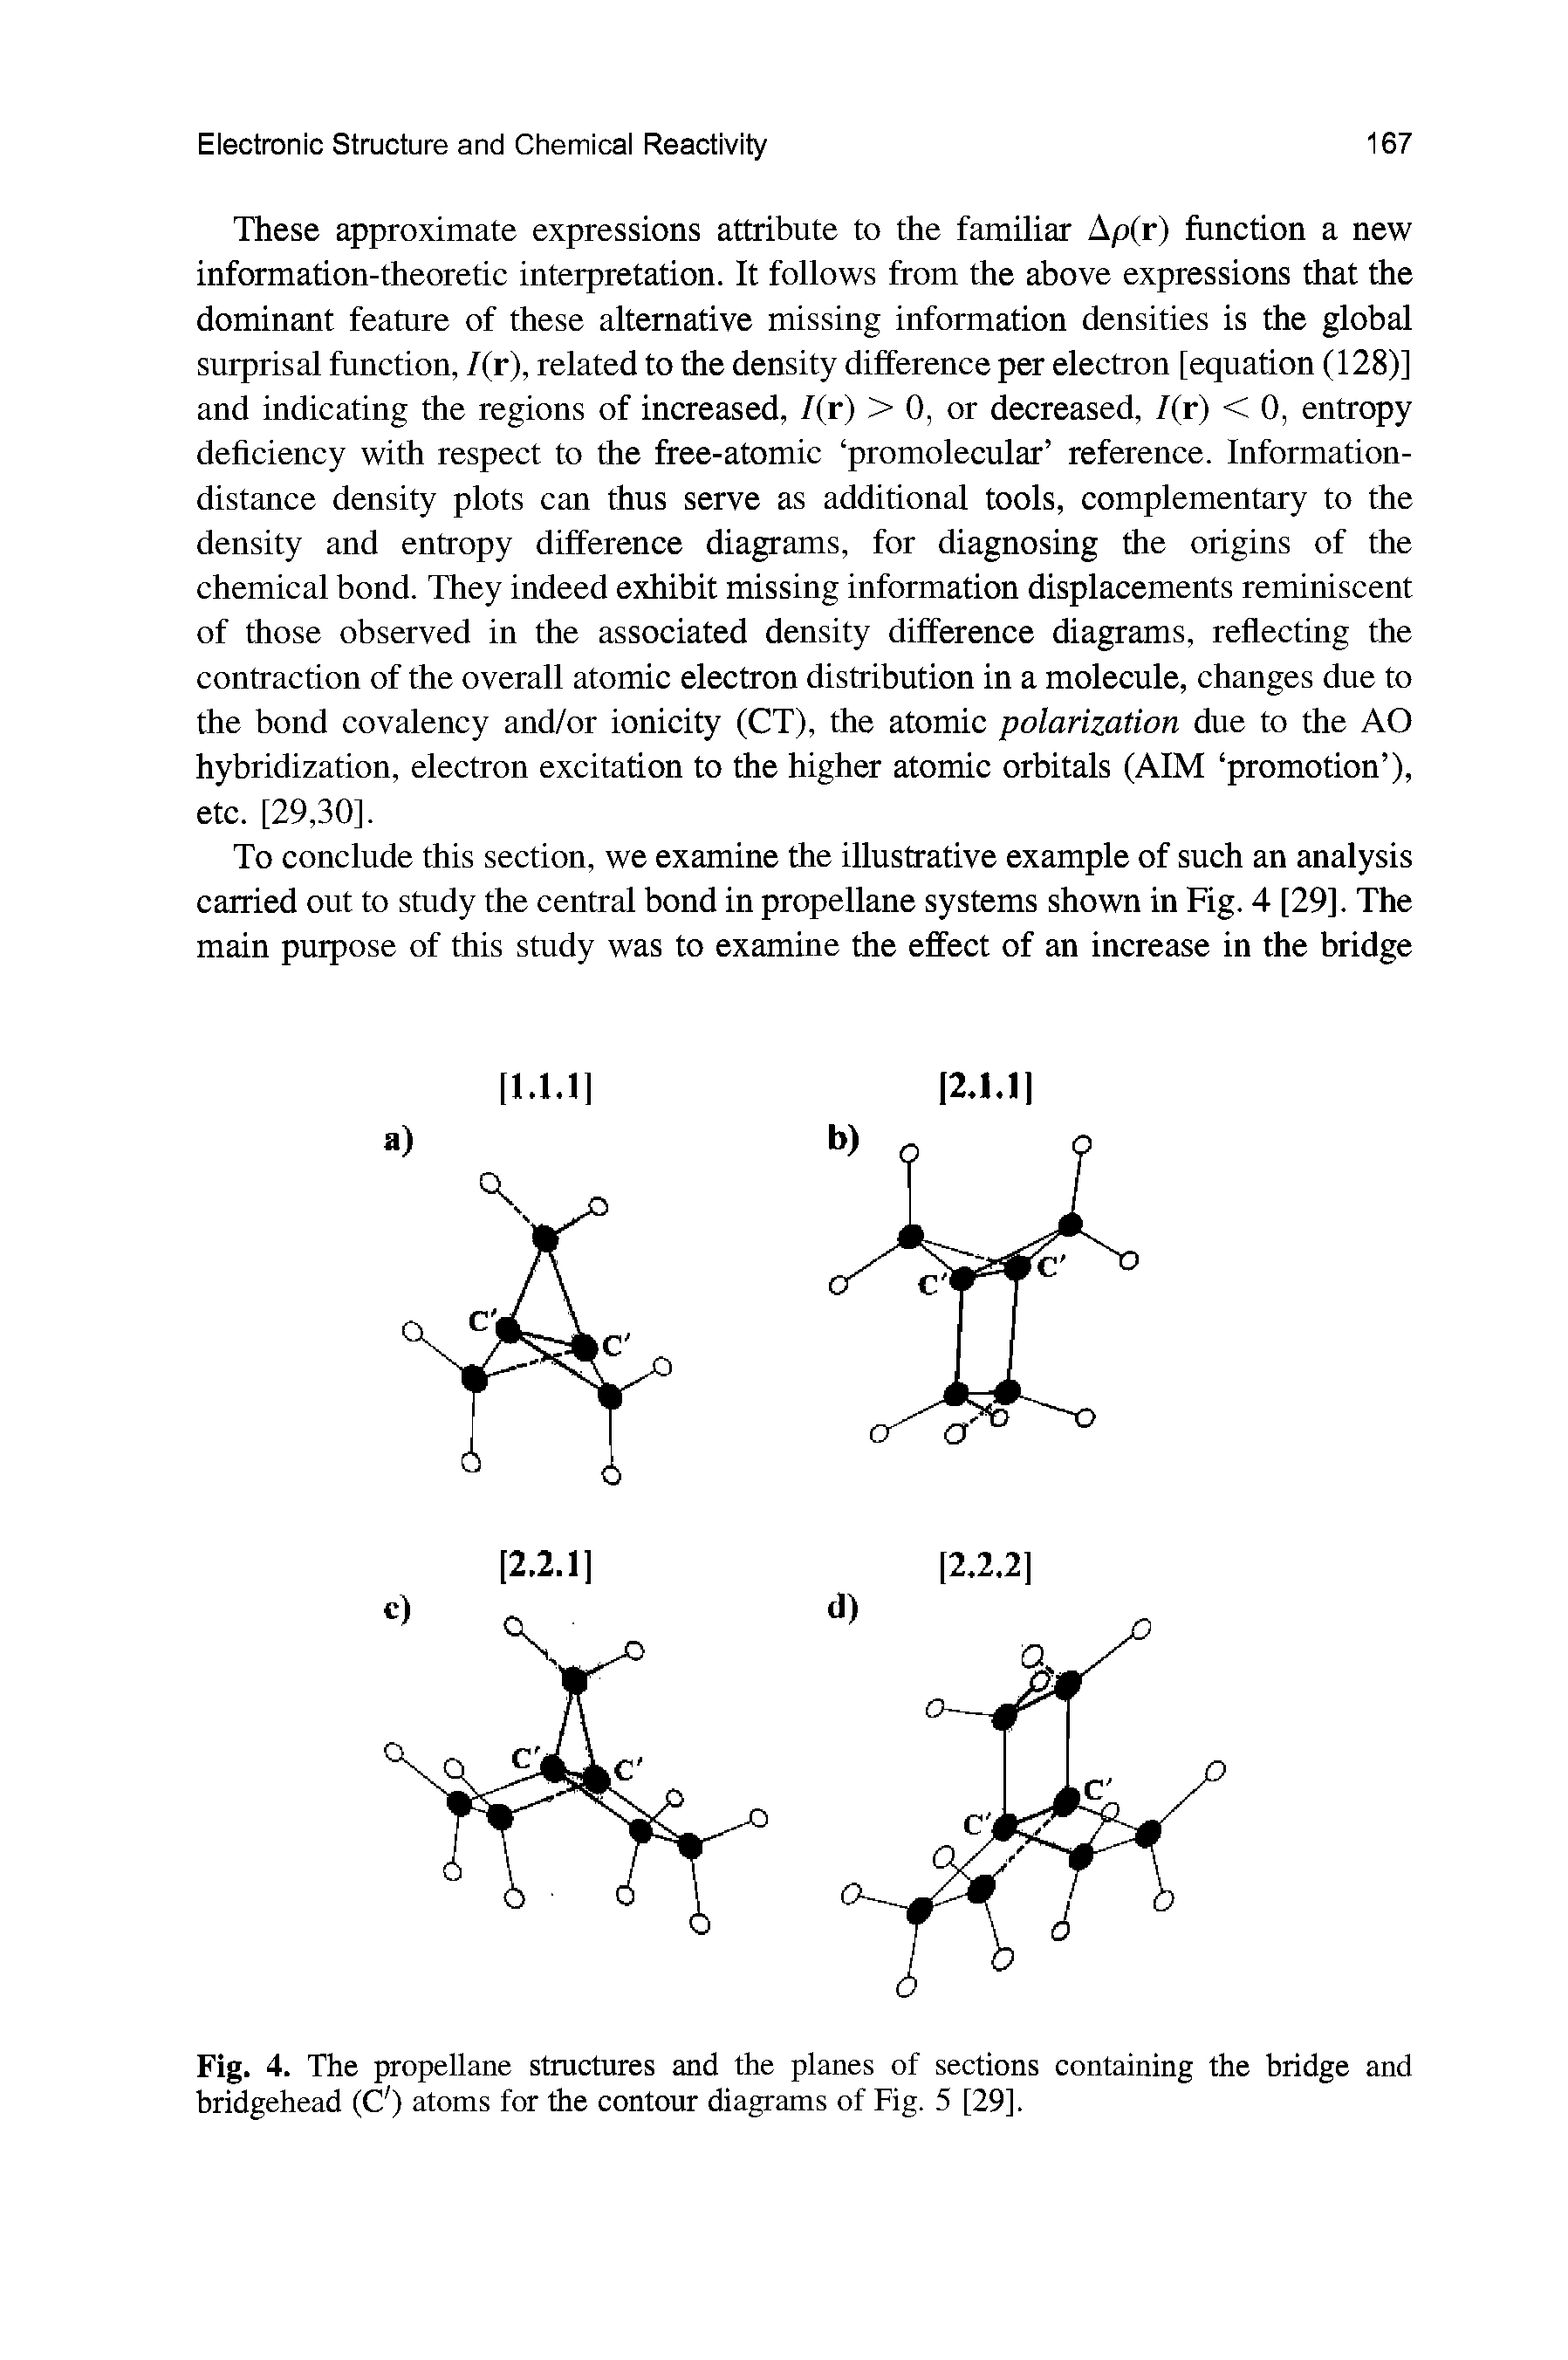 Fig. 4. The propellane structures and the planes of sections containing the bridge and bridgehead (C ) atoms for the contour diagrams of Fig. 5 [29].